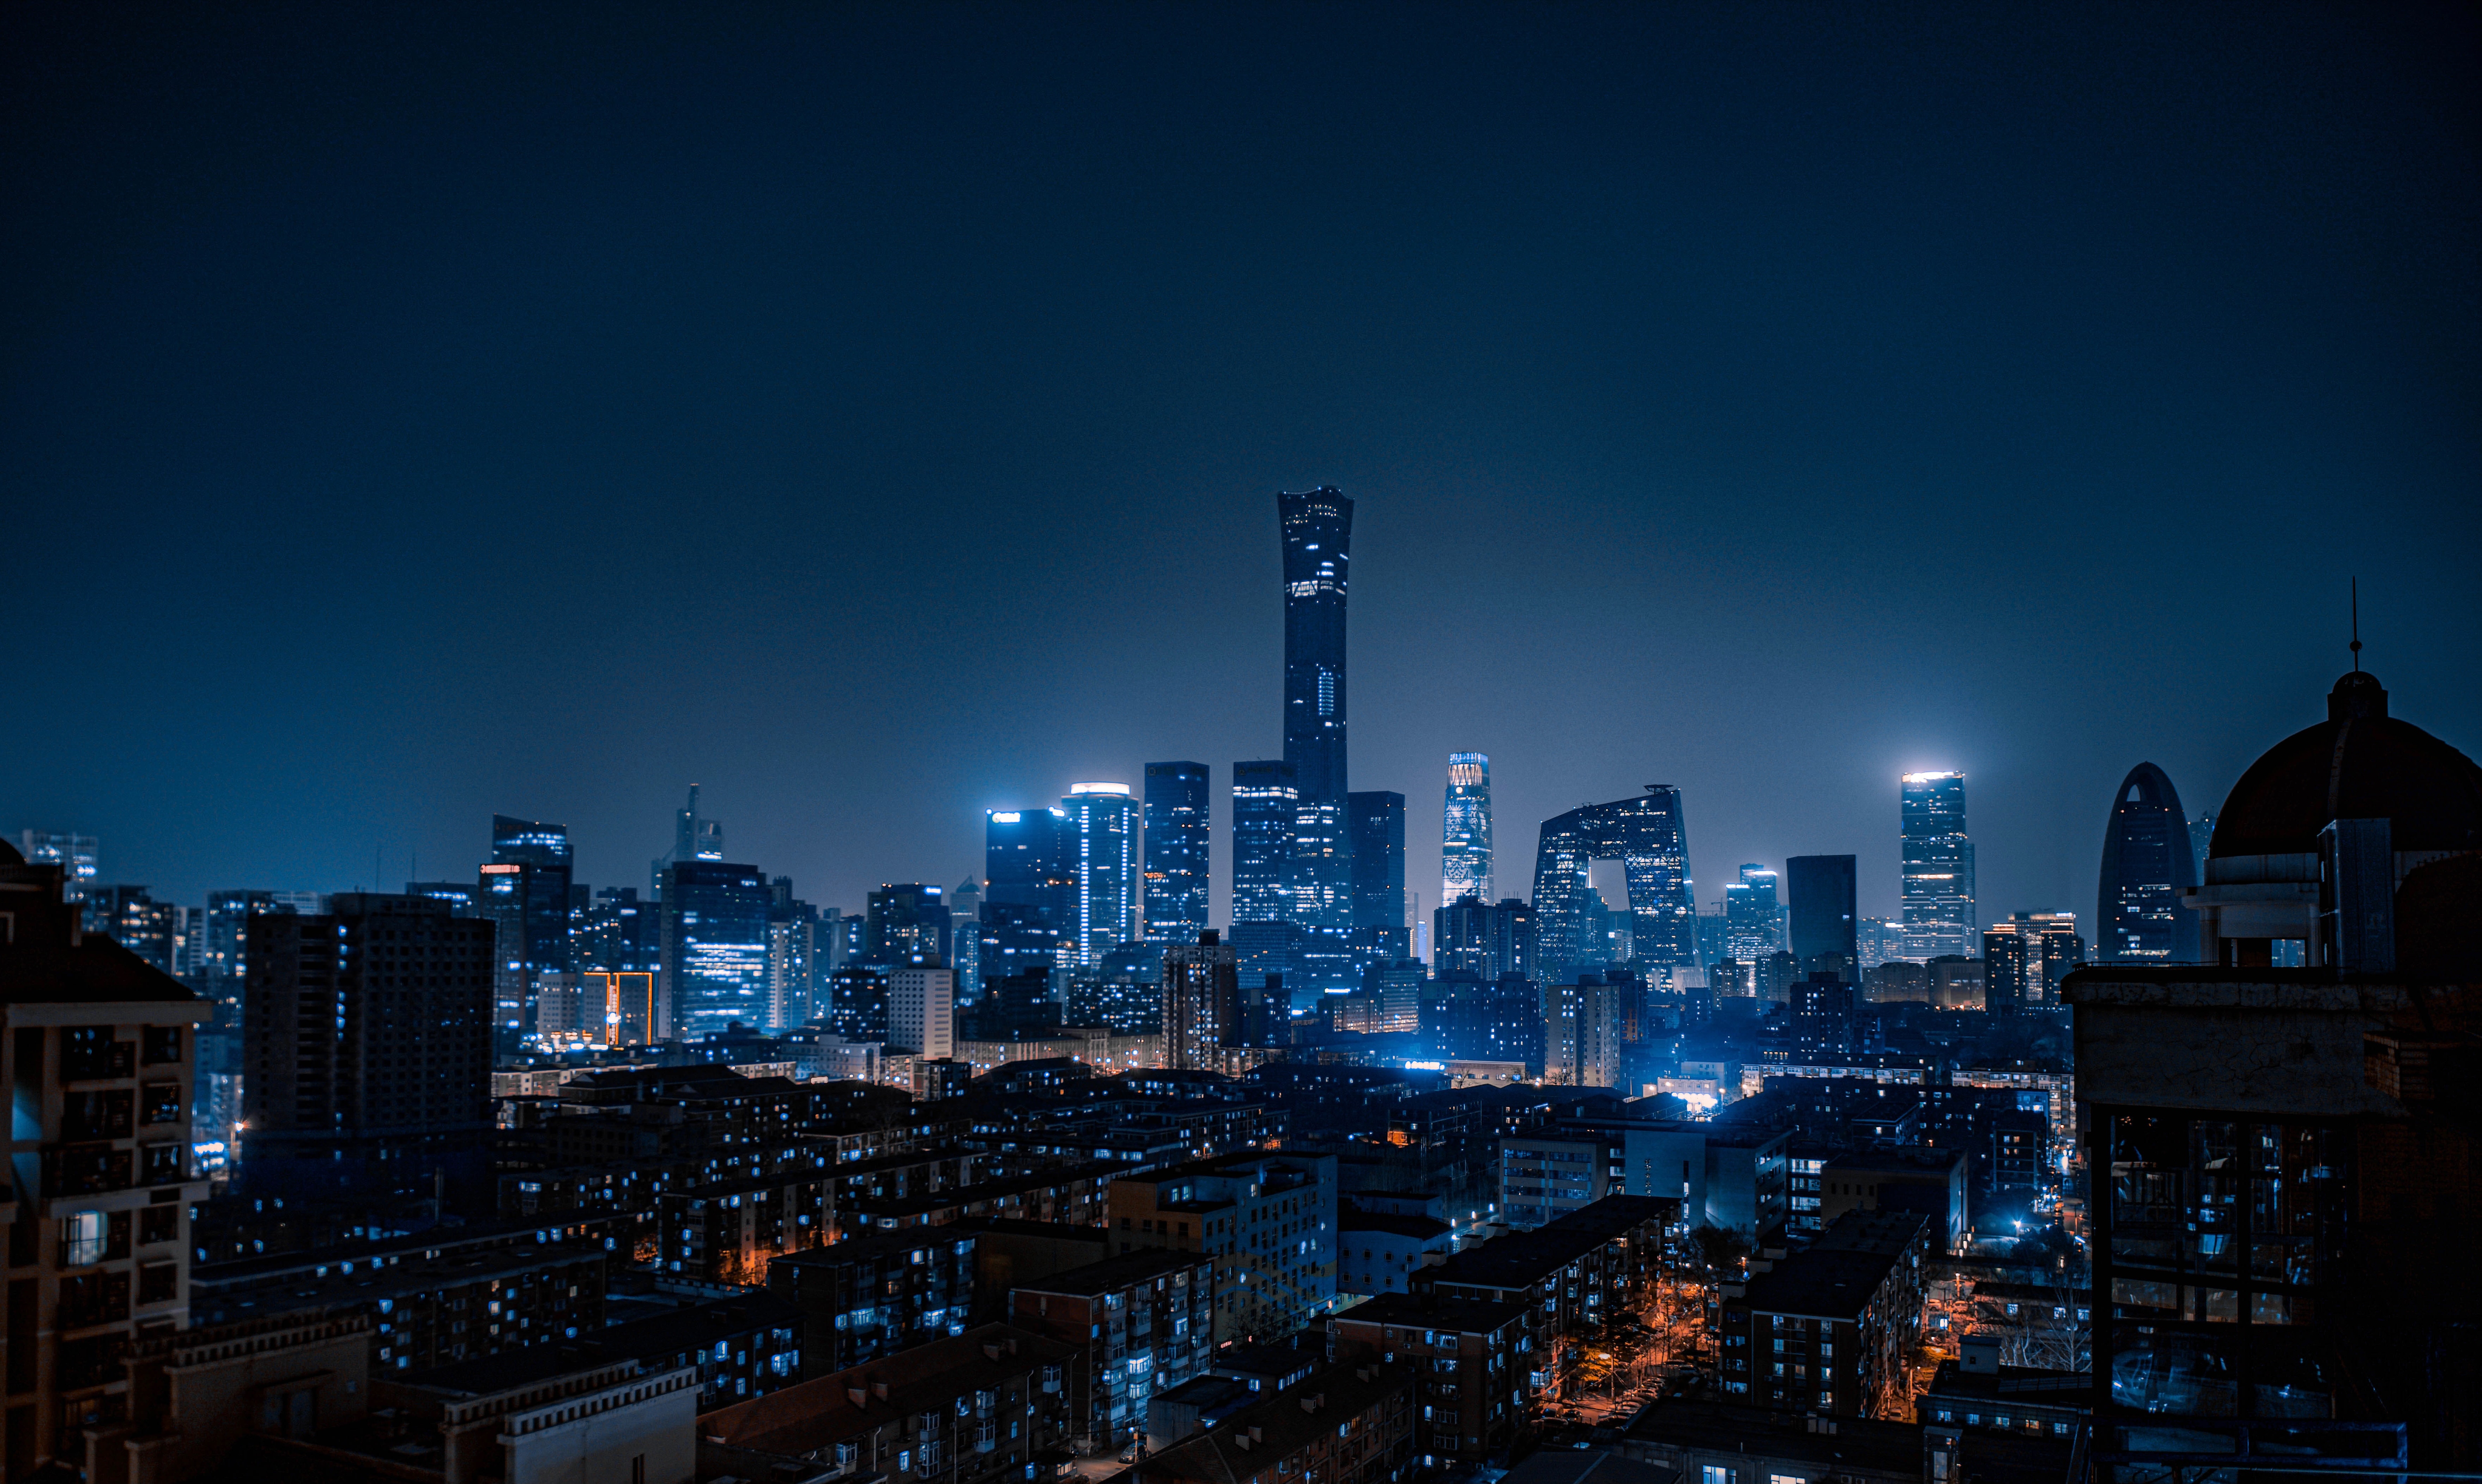 night, view from above, cities, city, building, lights, china, beijing